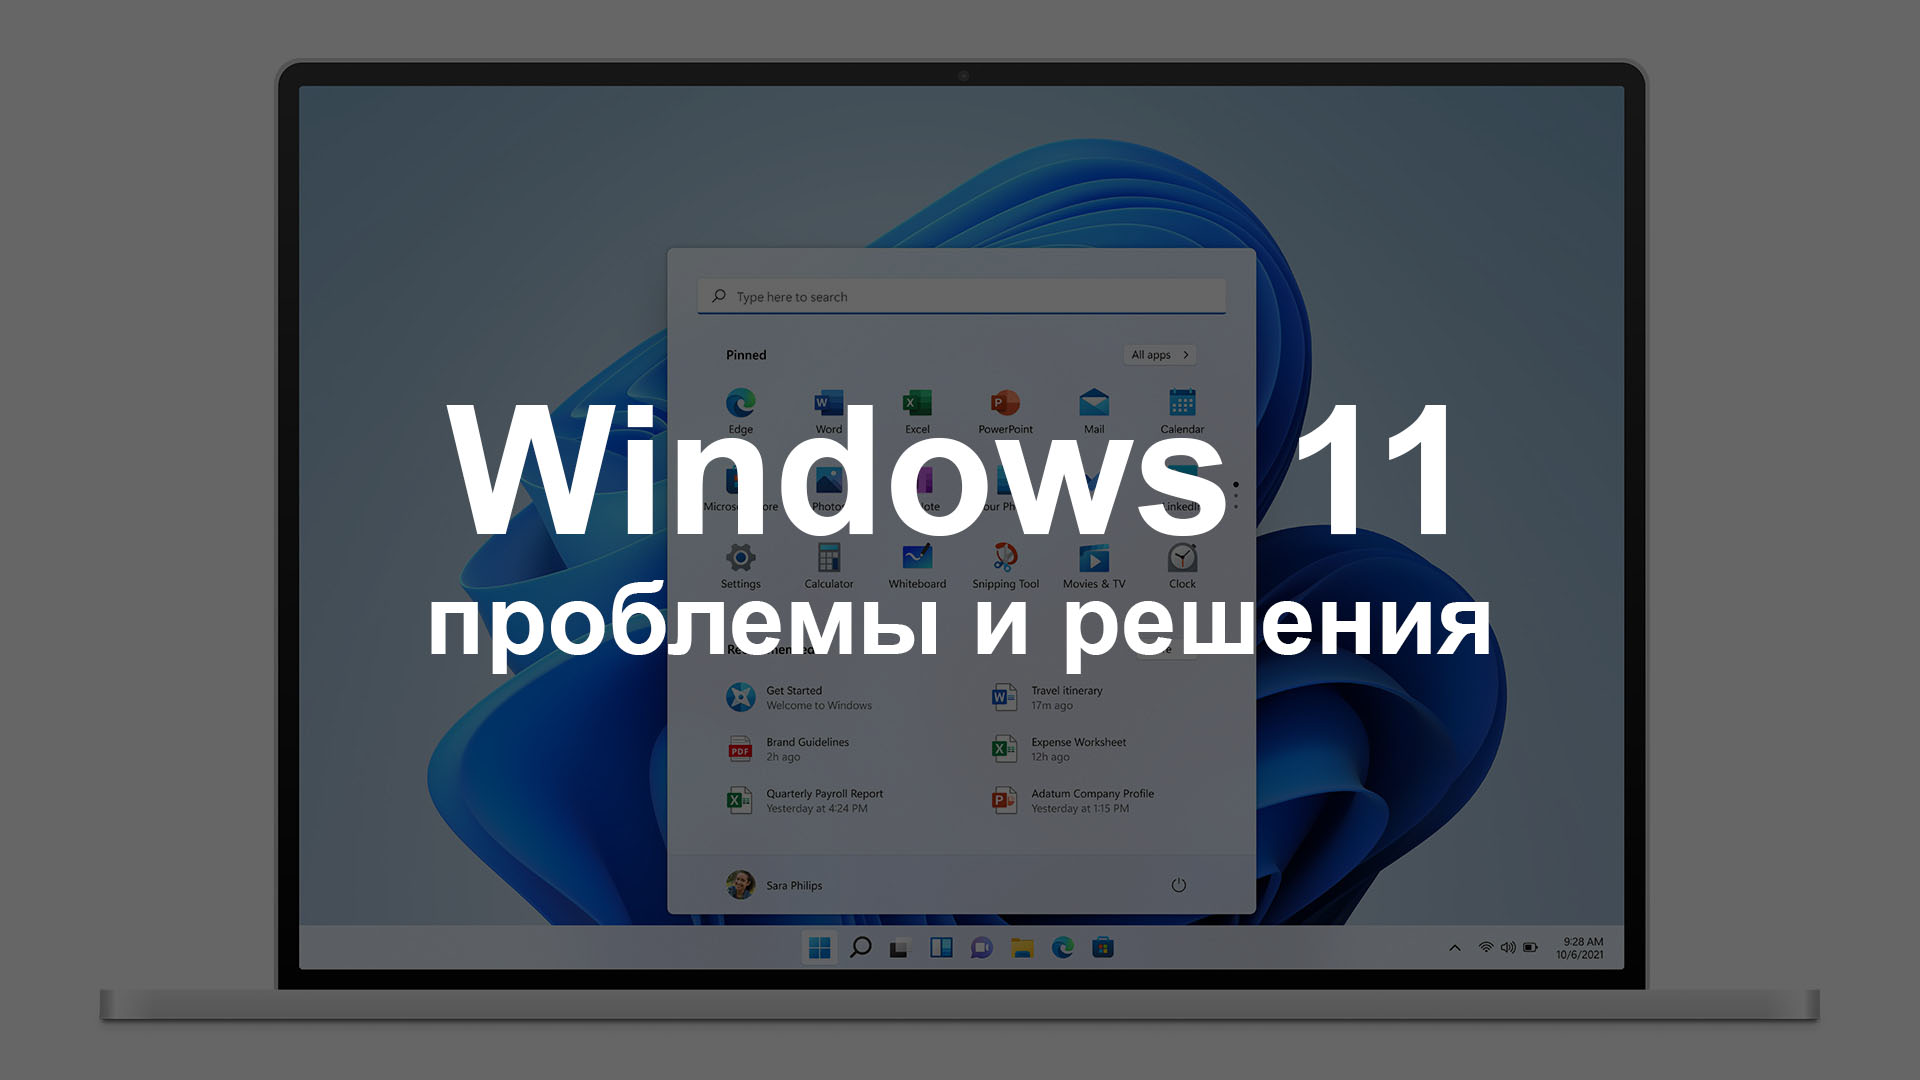 windows 11 22000.51 iso download